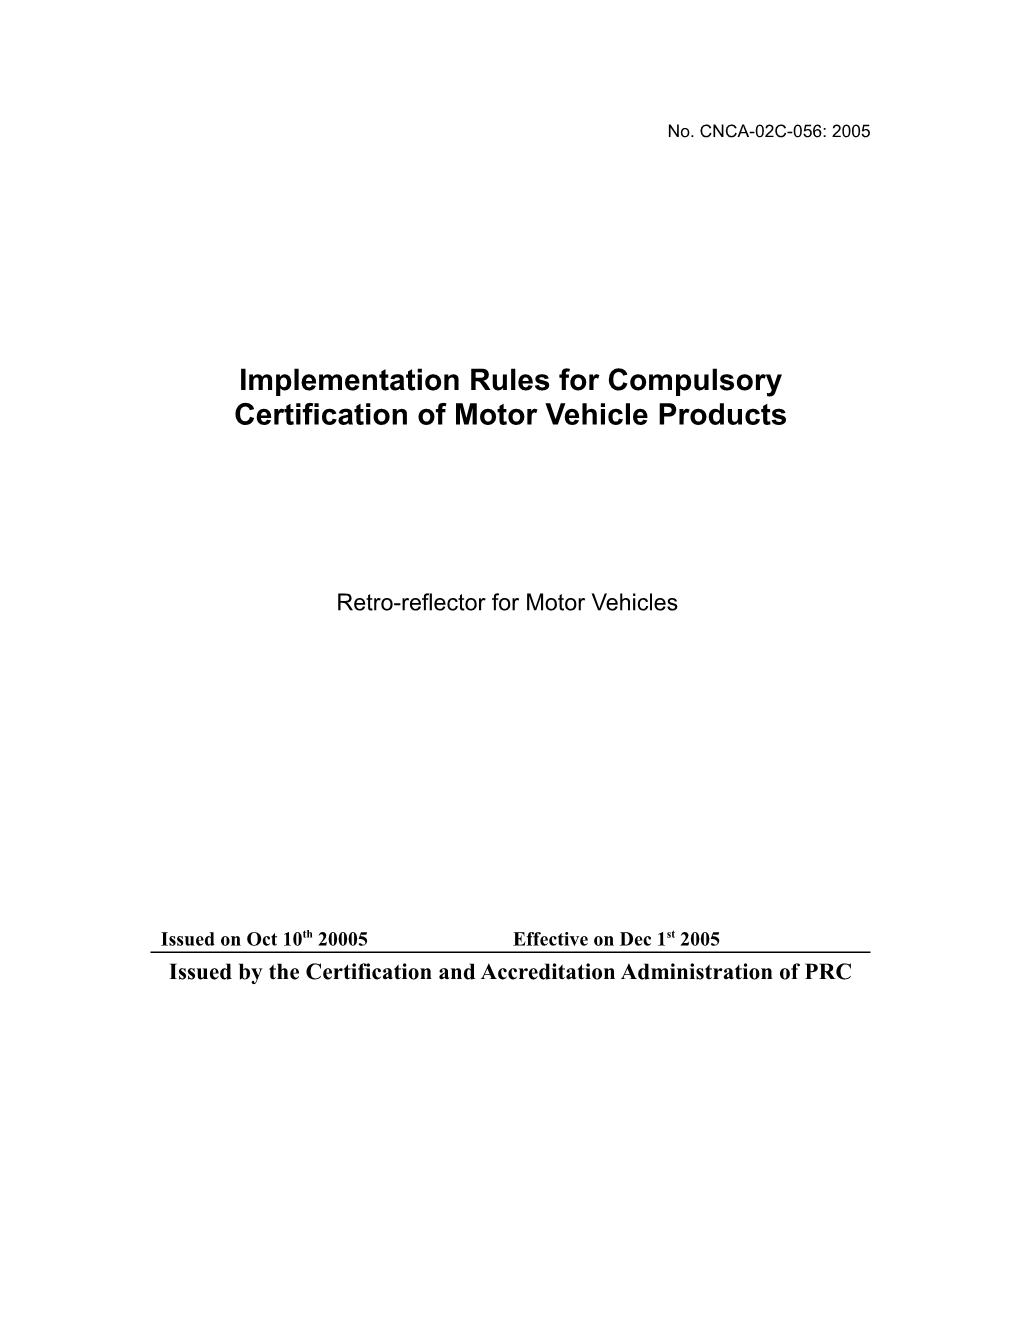 Implementation Rules for Compulsory Certification of Motor Vehicle Products